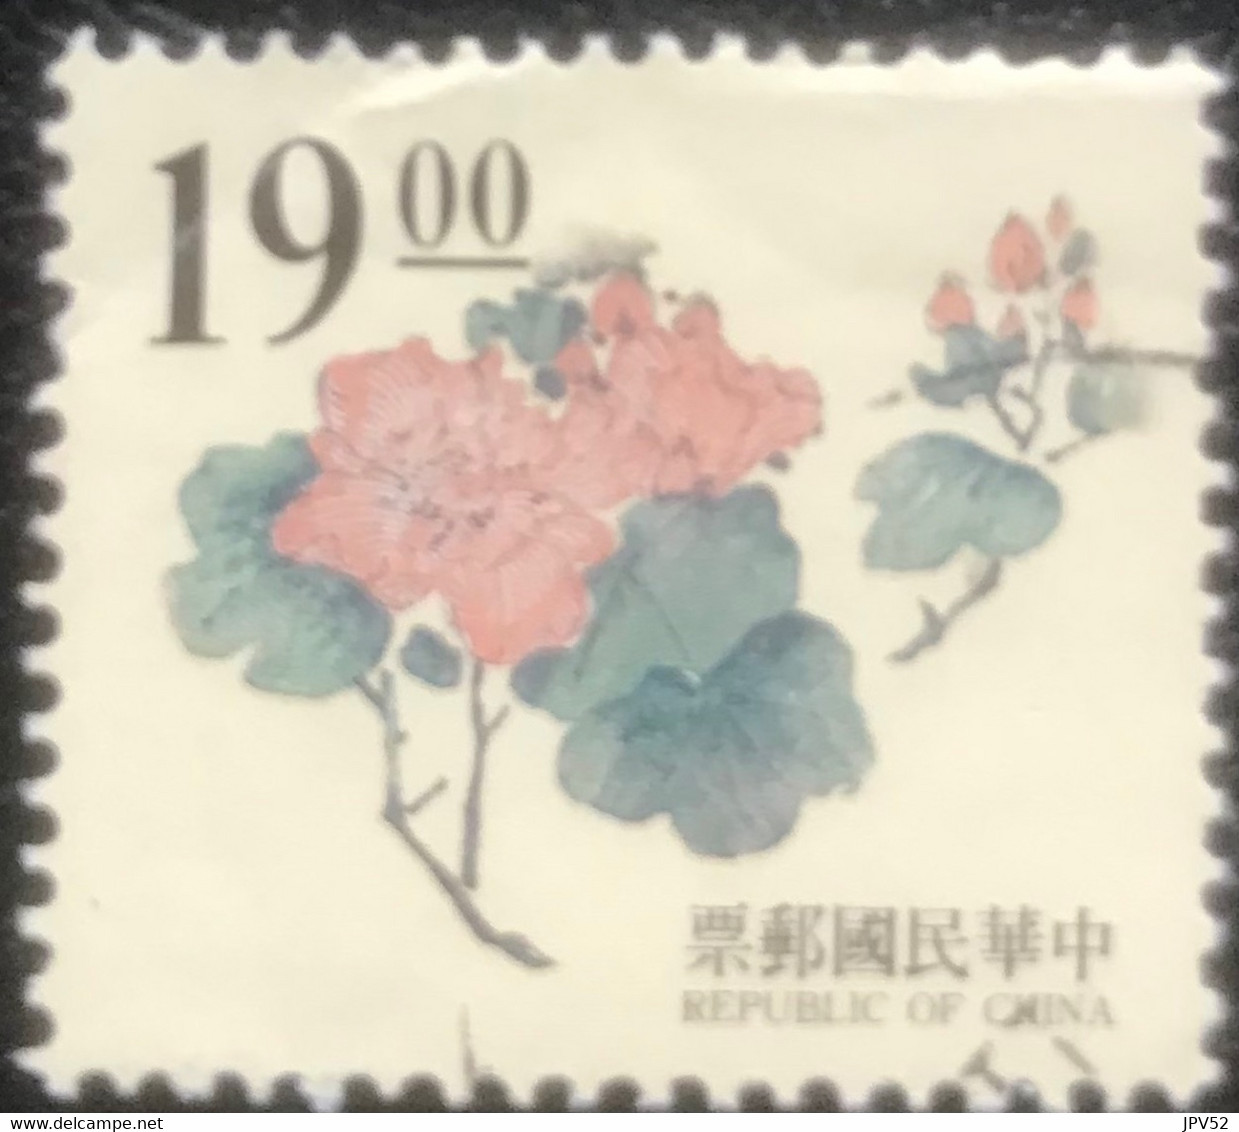 Republic Of China - Taiwan - C6/11 - (°)used - 1995 - Michel 2219 - Oude Chinese Gravures - Gebraucht